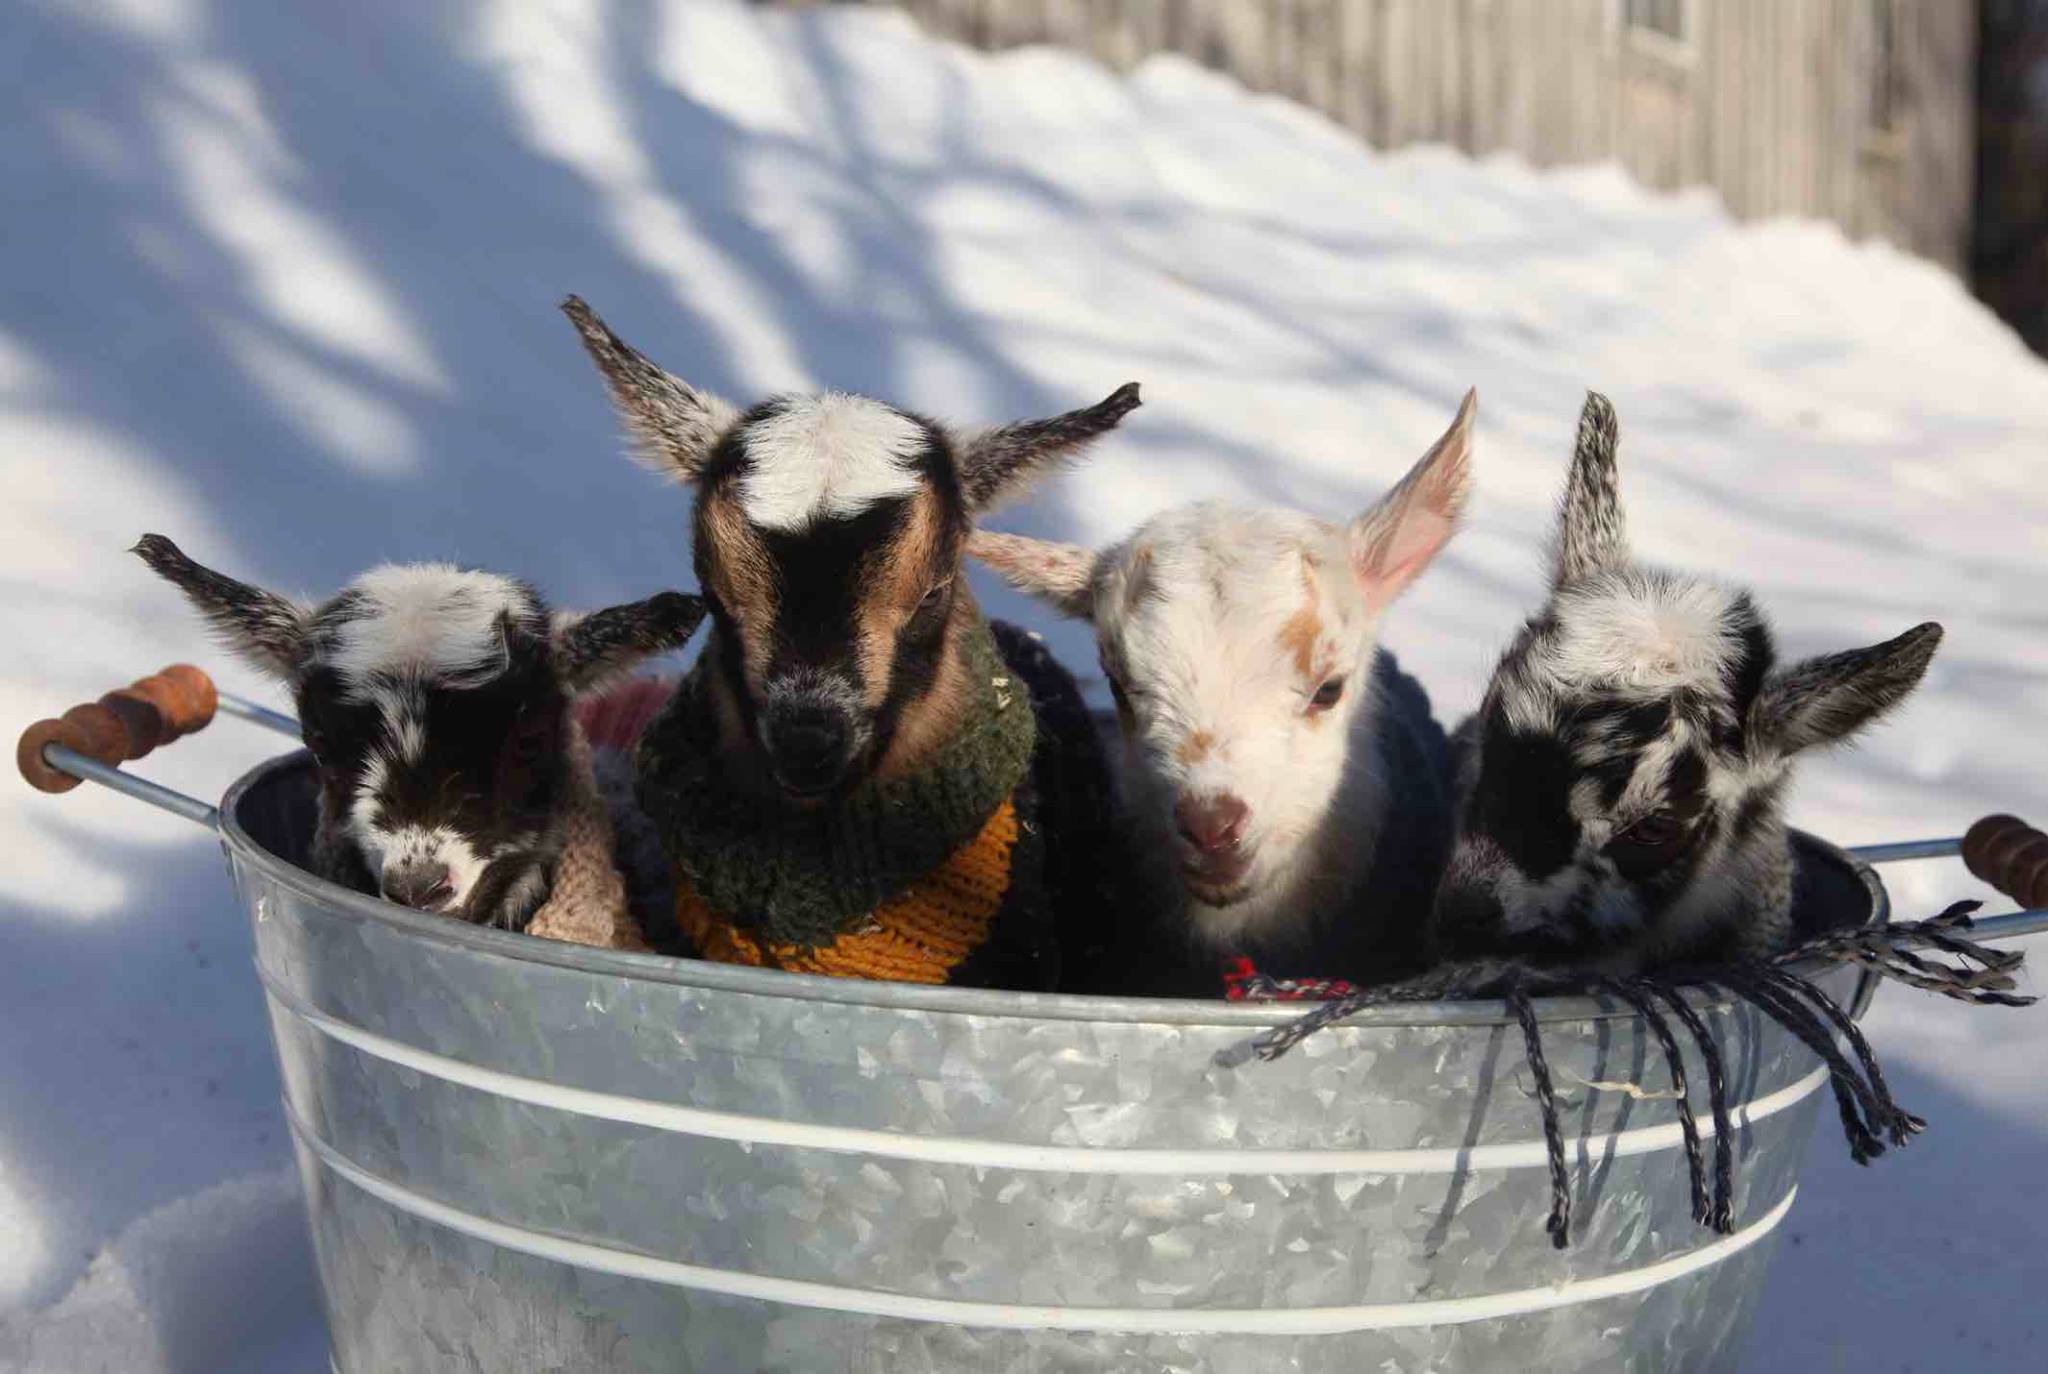 Baby Goats in a Bucket